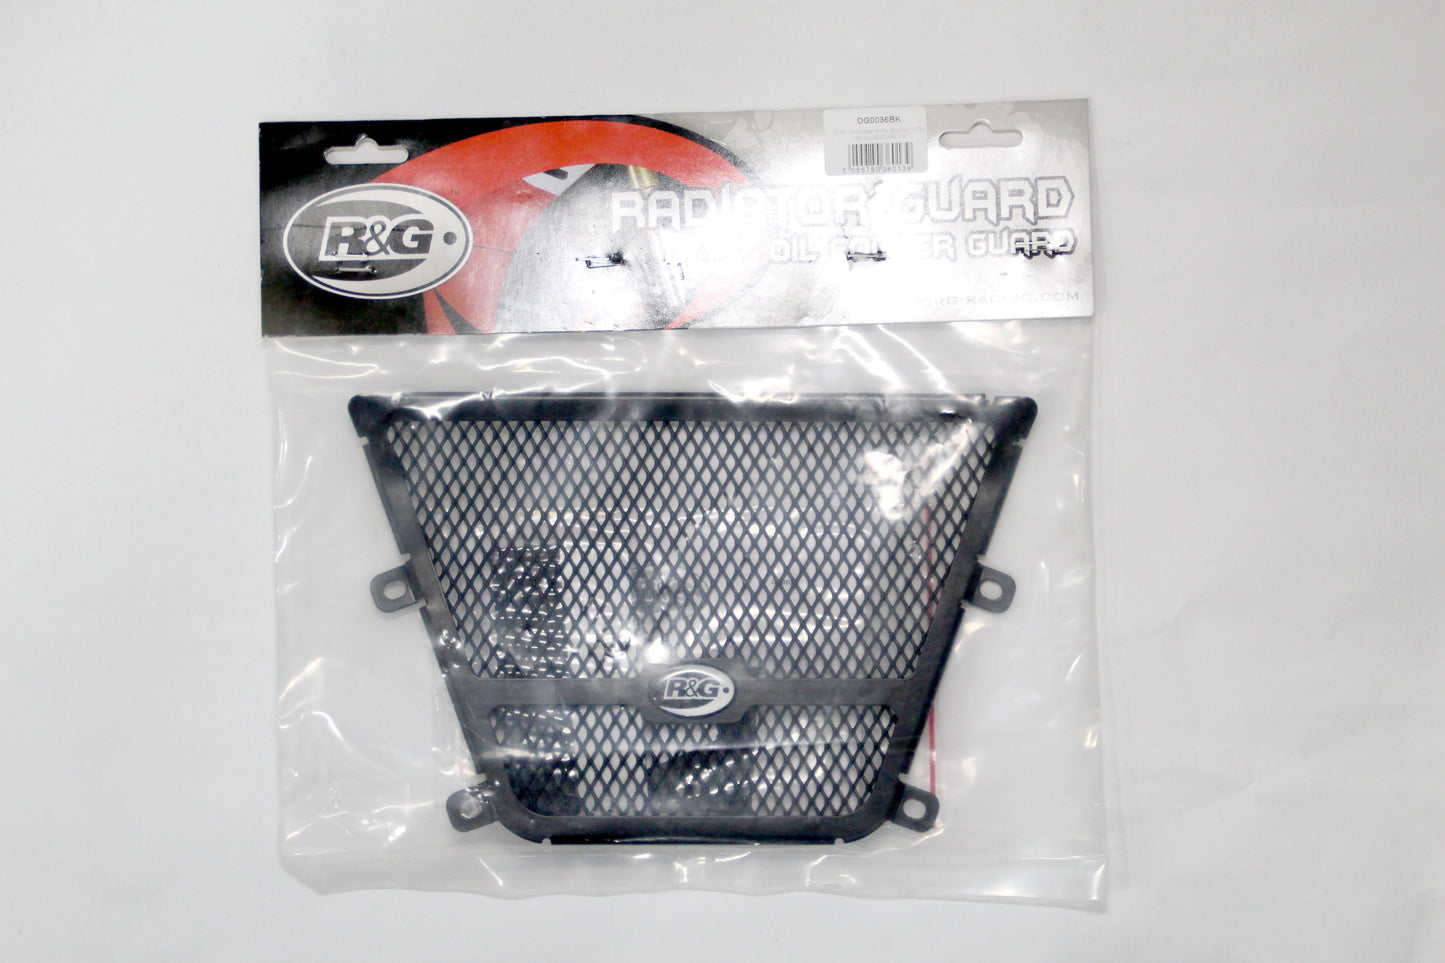 R&G Downpipe Grille fits for KTM 790 Adventure ('19-) - Durian Bikers